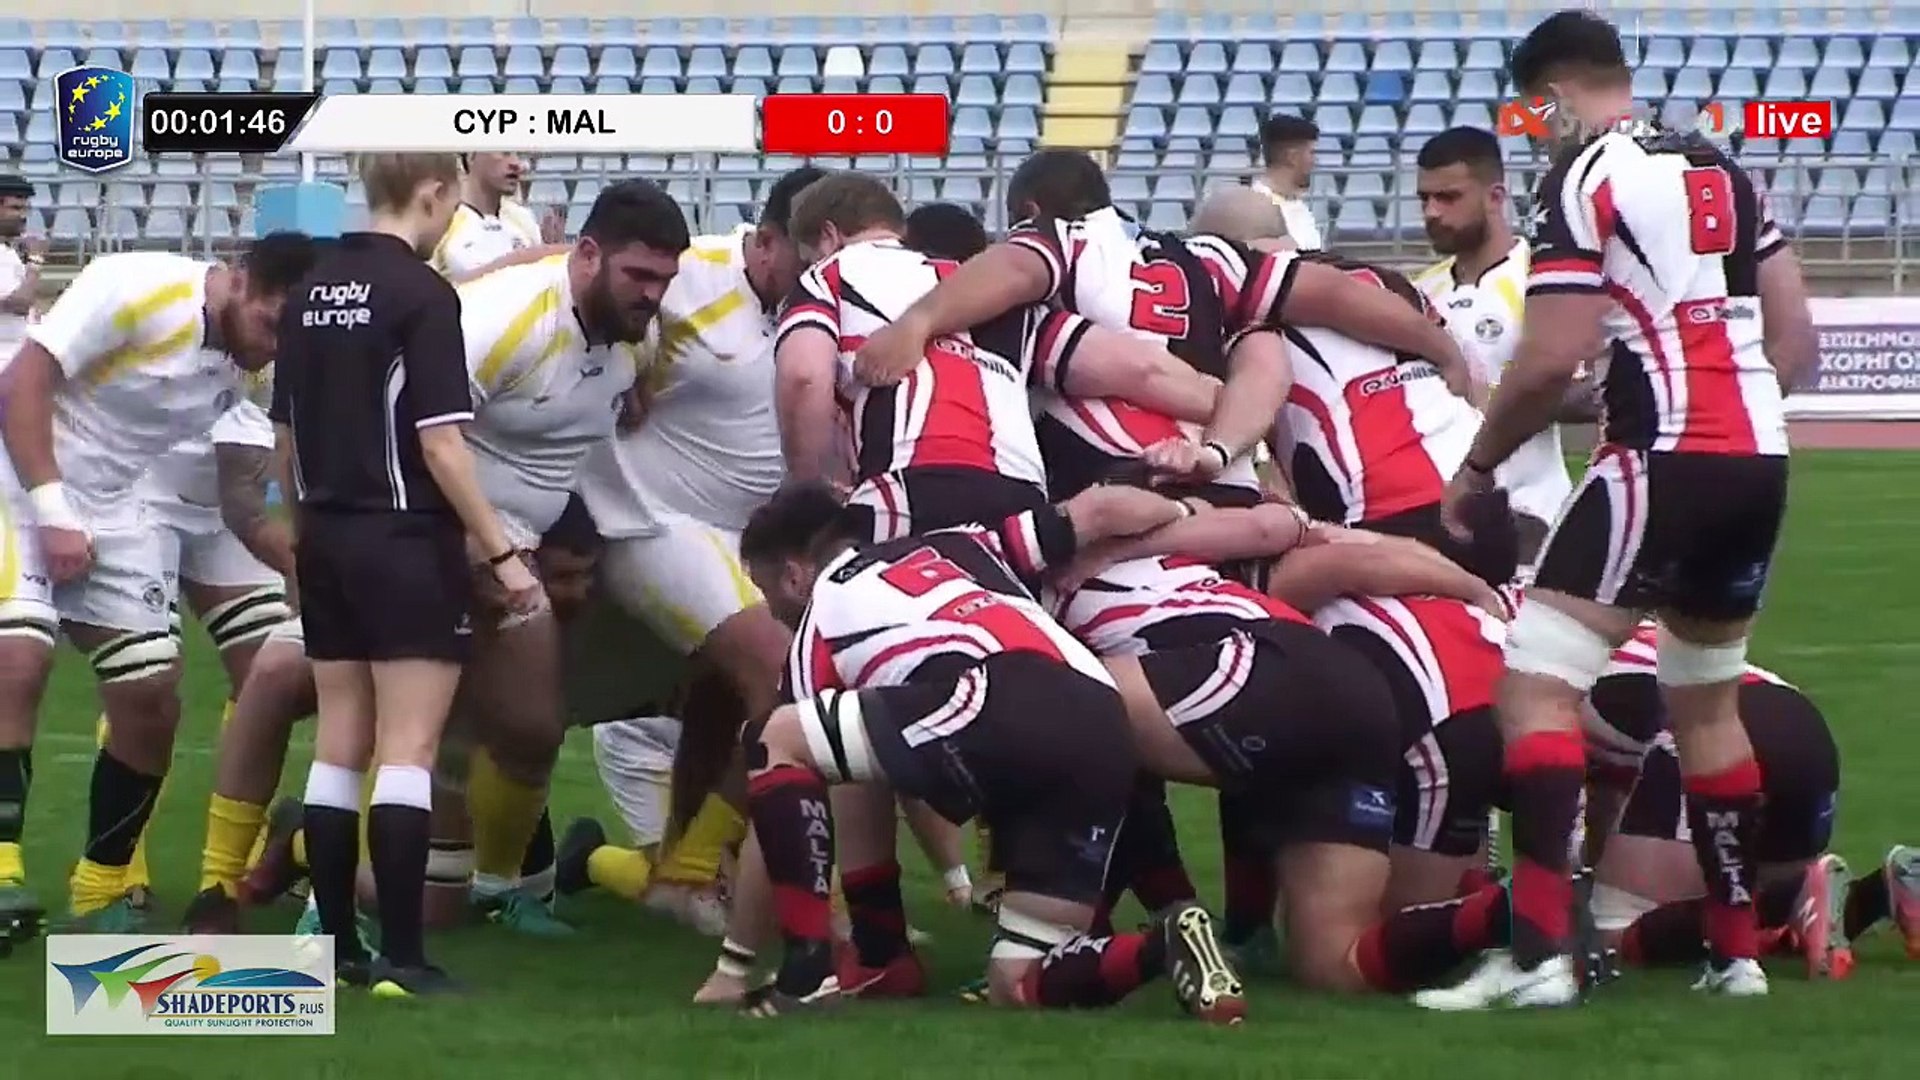 REPLAY CYPRUS / MALTA - RUGBY EUROPE CONFERENCE 1 SOUTH 2018/2019